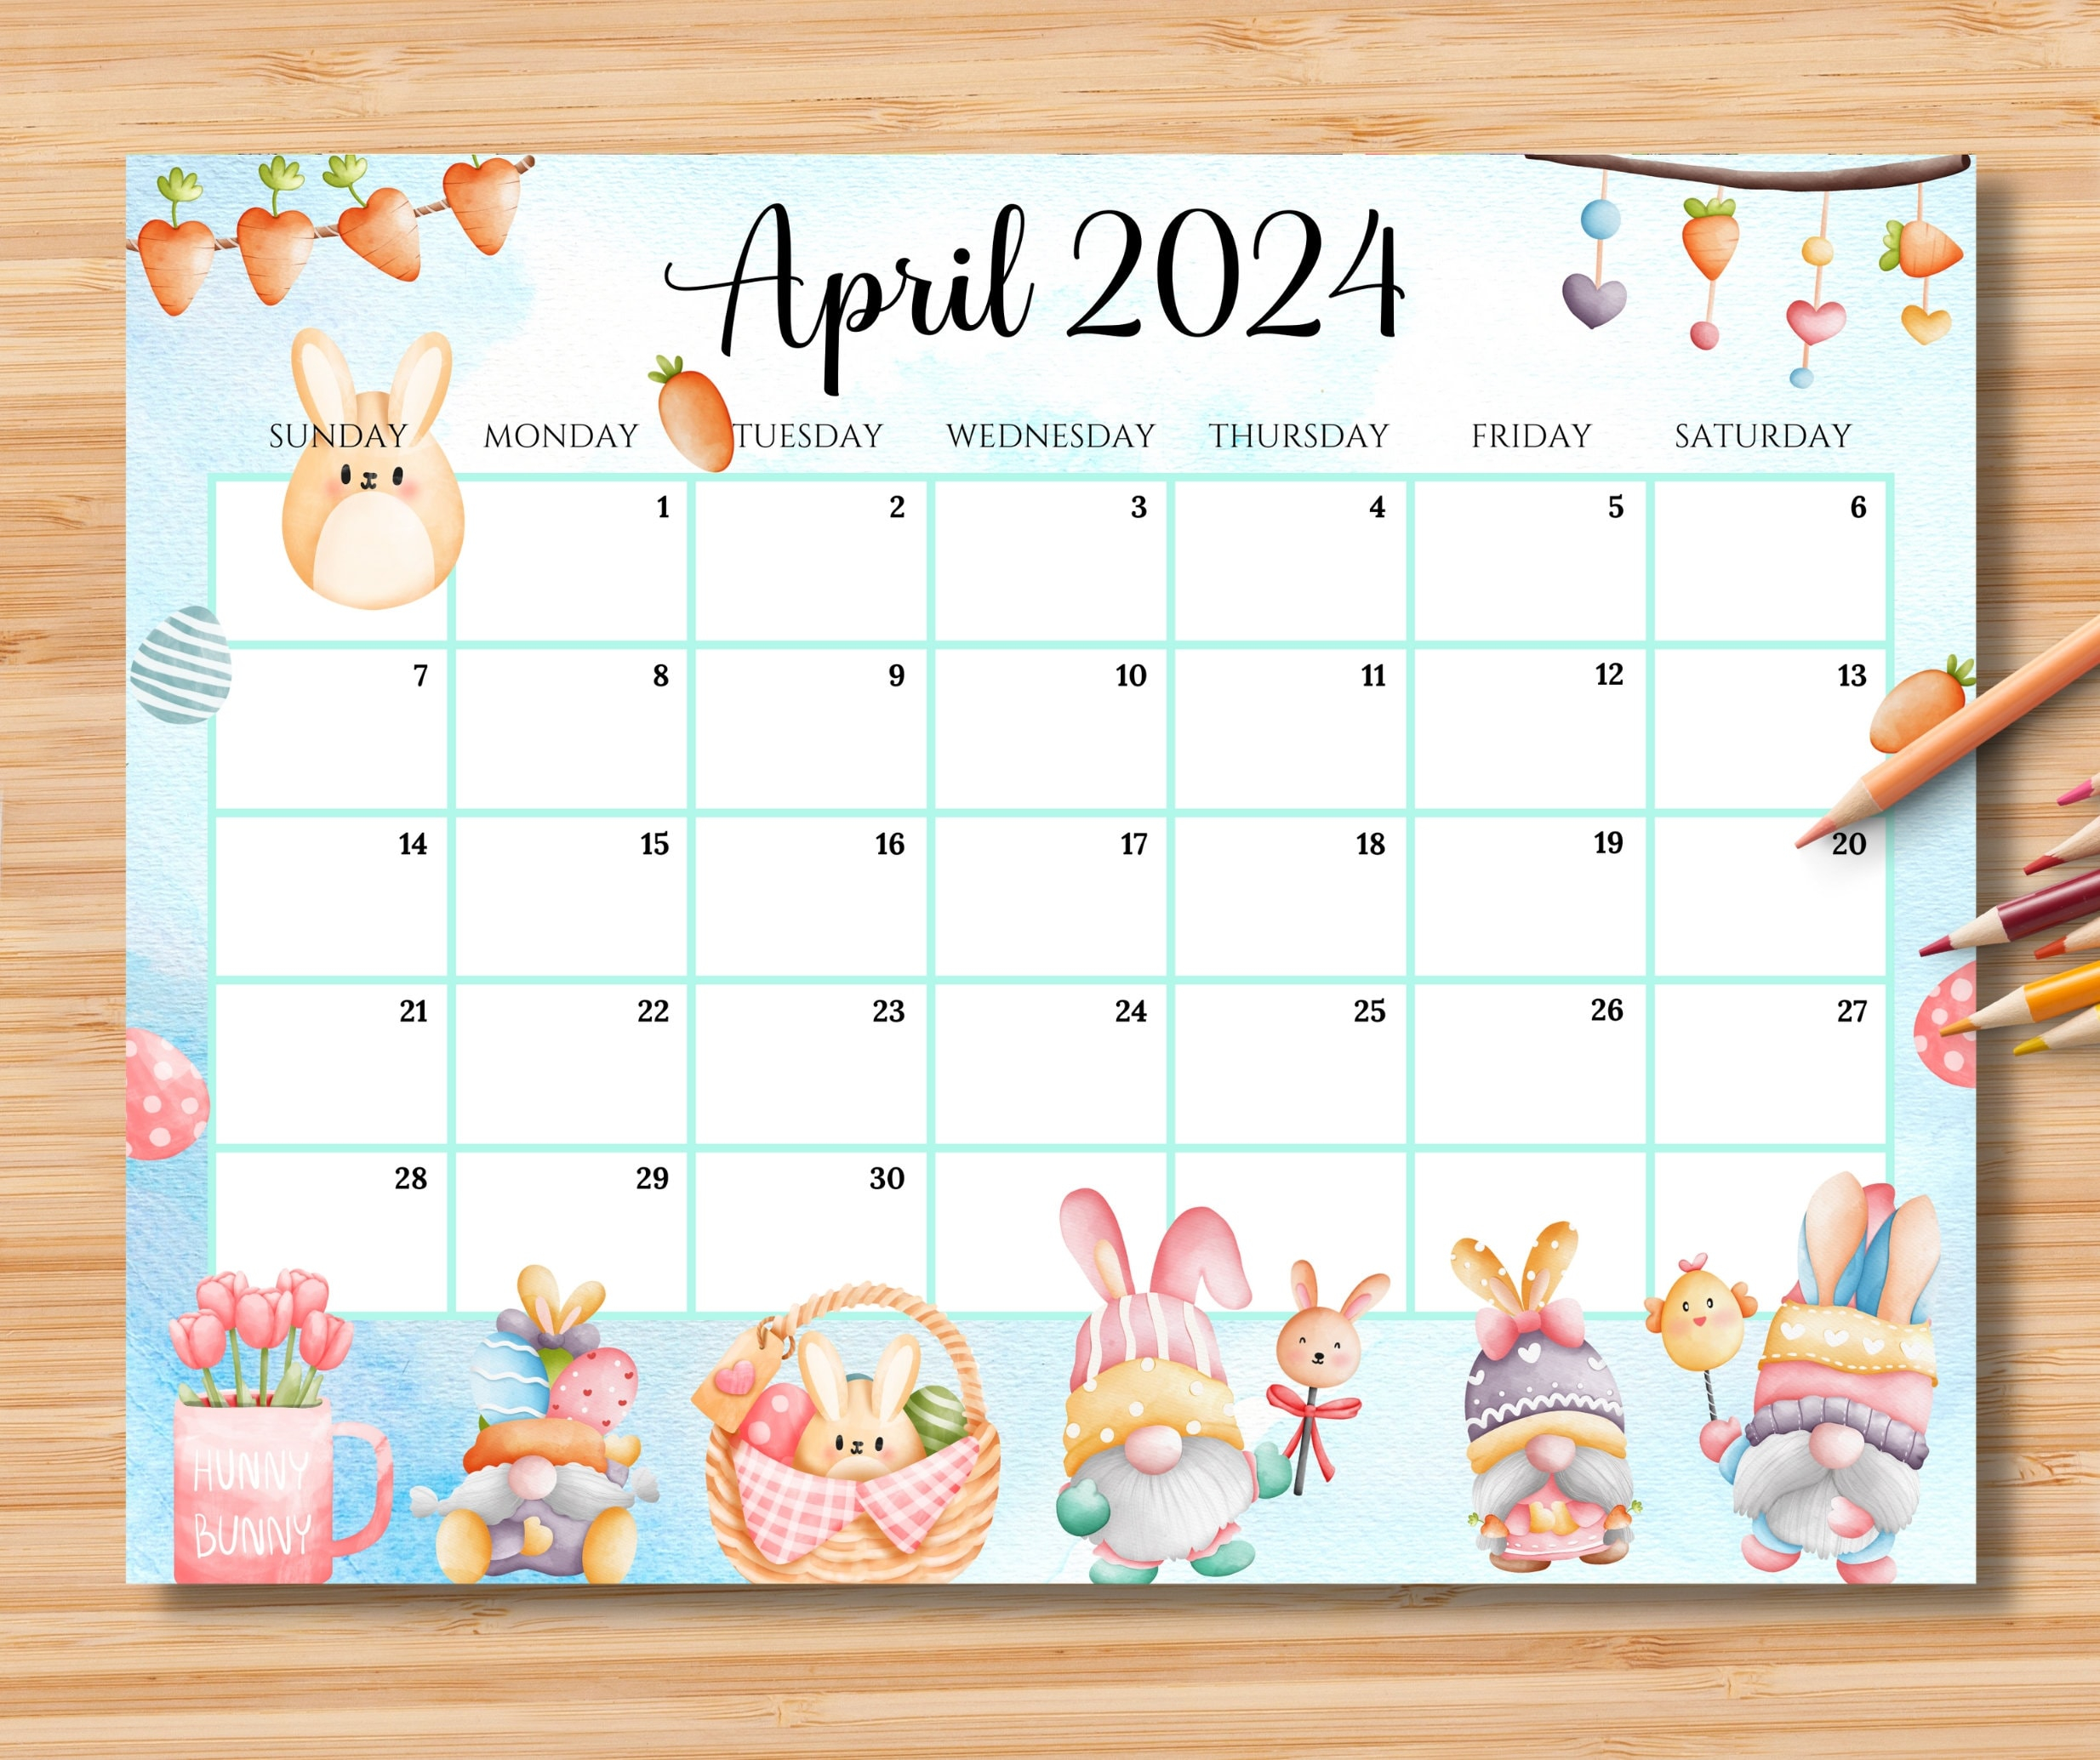 Editable April 2024 Calendar, Happy Easter Day With Cute Gnomes throughout April 2024 Calendar Cute